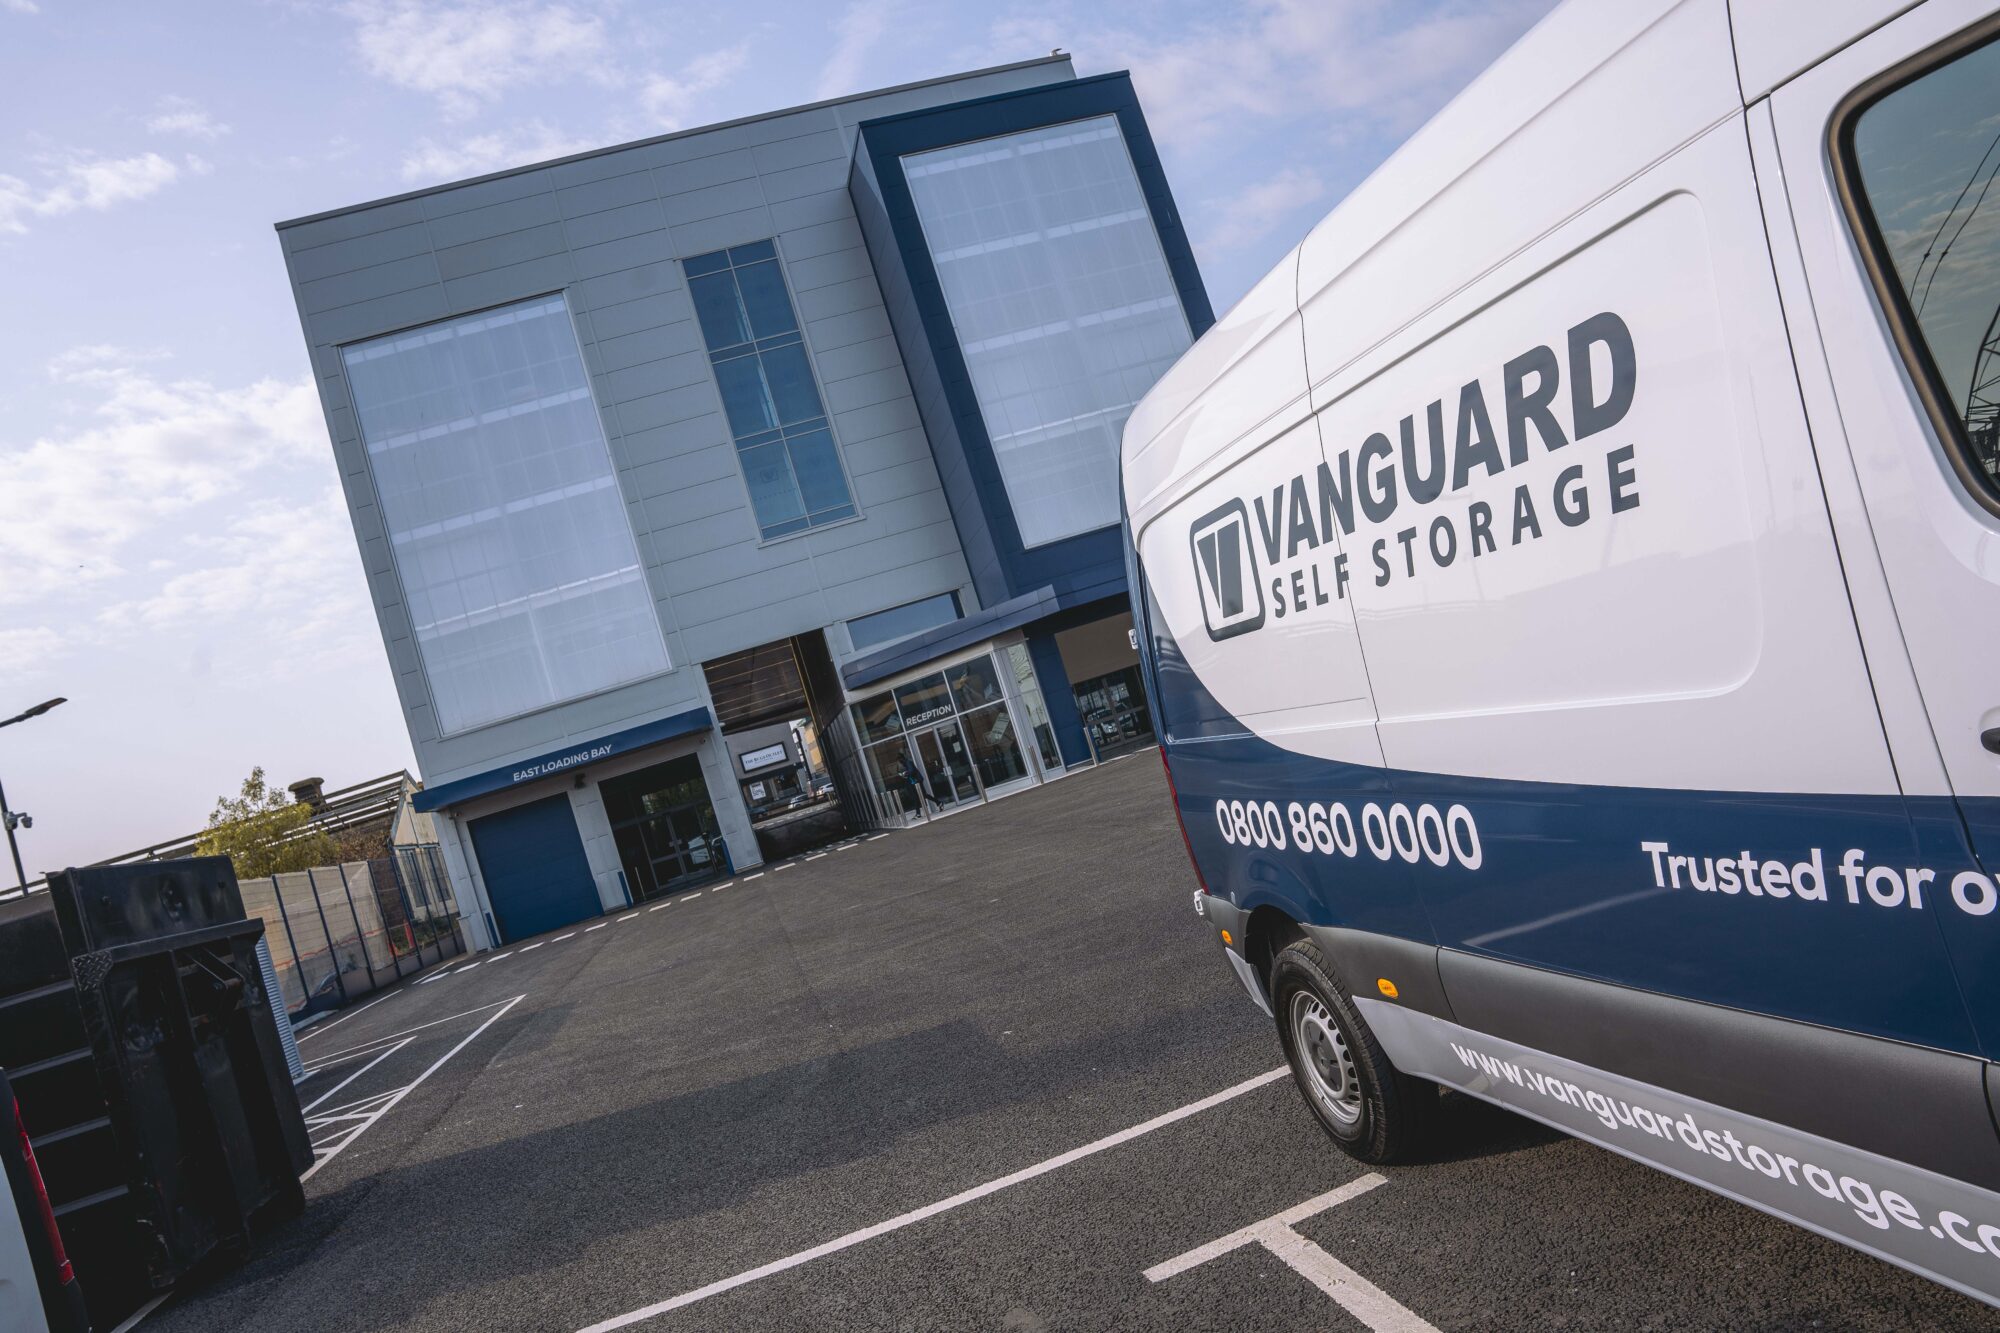 A photo showing the exterior of the Vanguard Self Storage branch in Staples Corner, with the Vanguard van parked on the right.